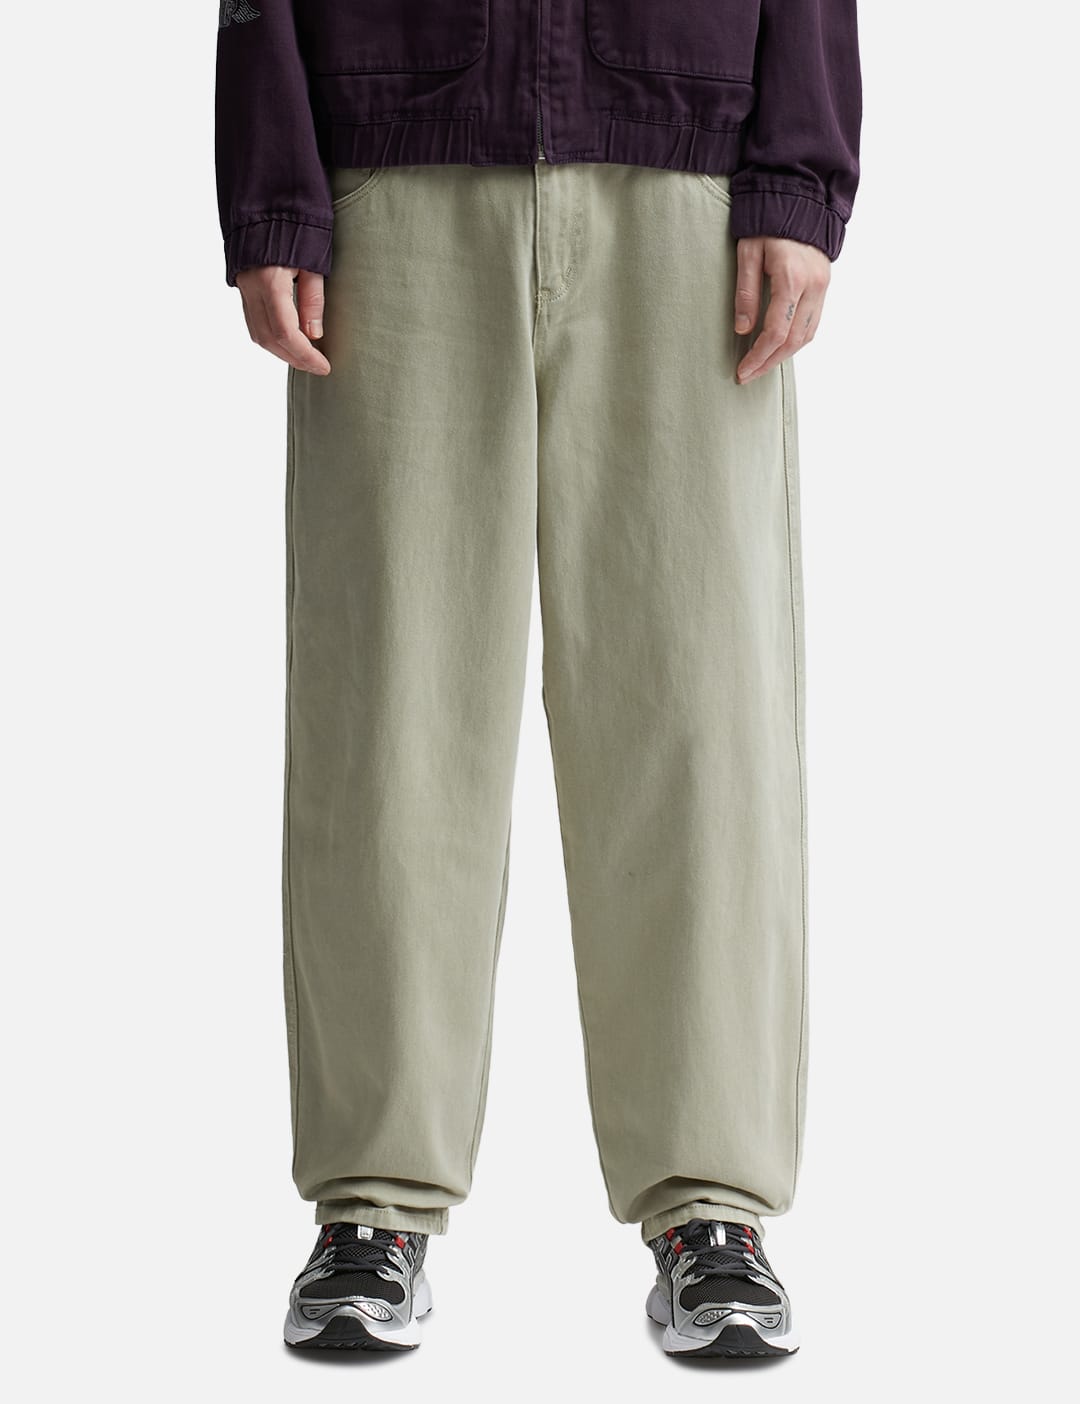 Dime - DIME BAGGY DENIM PANTS | HBX - Globally Curated Fashion and